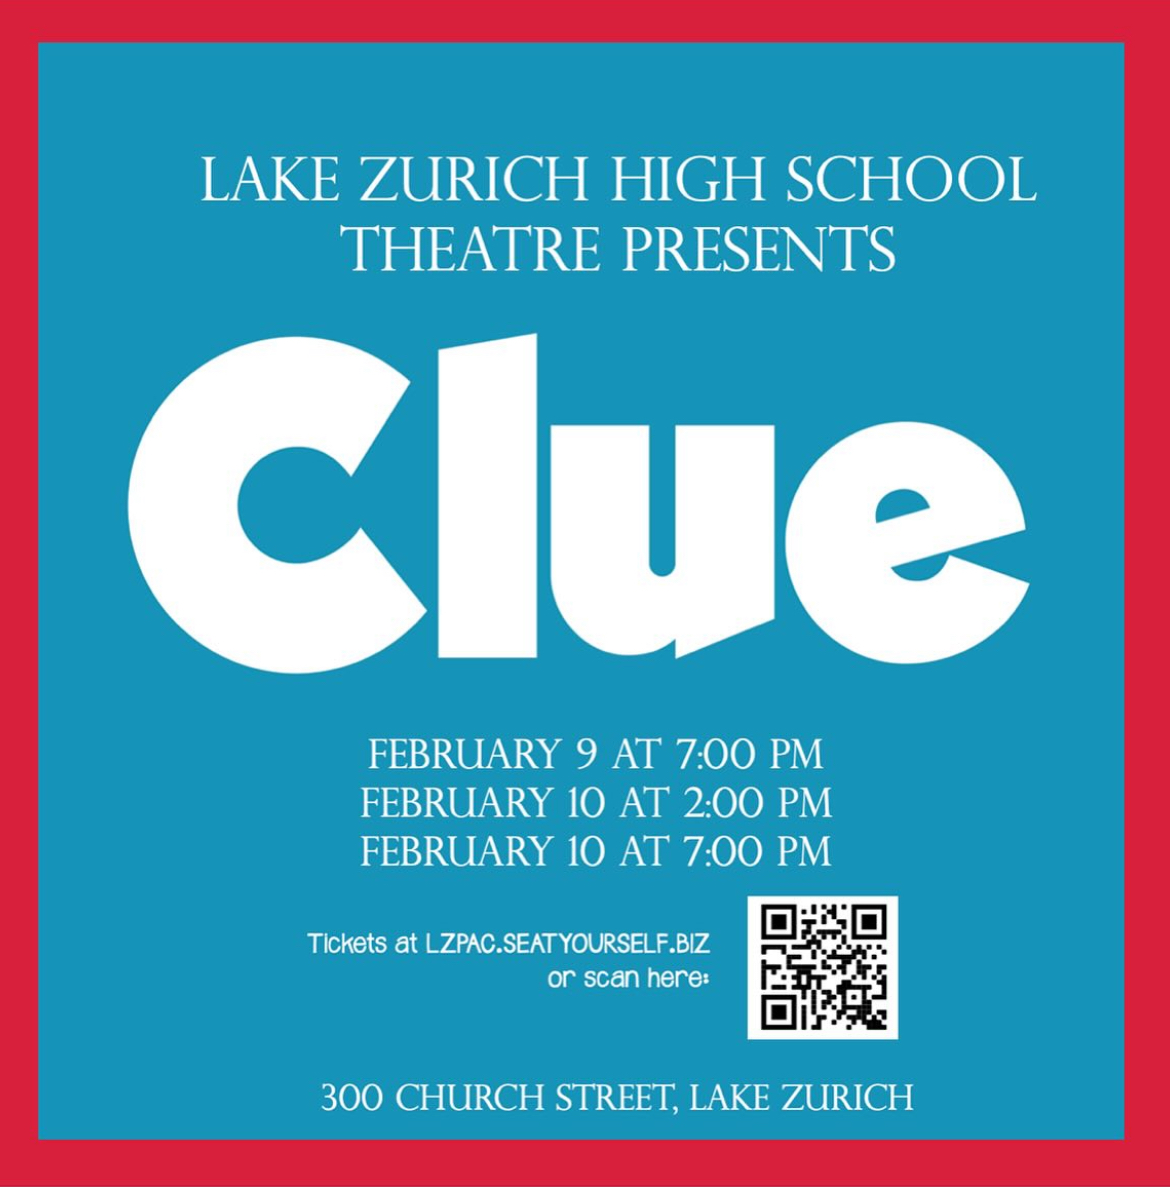 LZHS+is+proud+to+present+Clue+as+the+spring+play.+The+show+is+going+to+be+performed+on+February+9th+at+7p.m.+and++February+10th+at+2p.m.+and+7p.m.